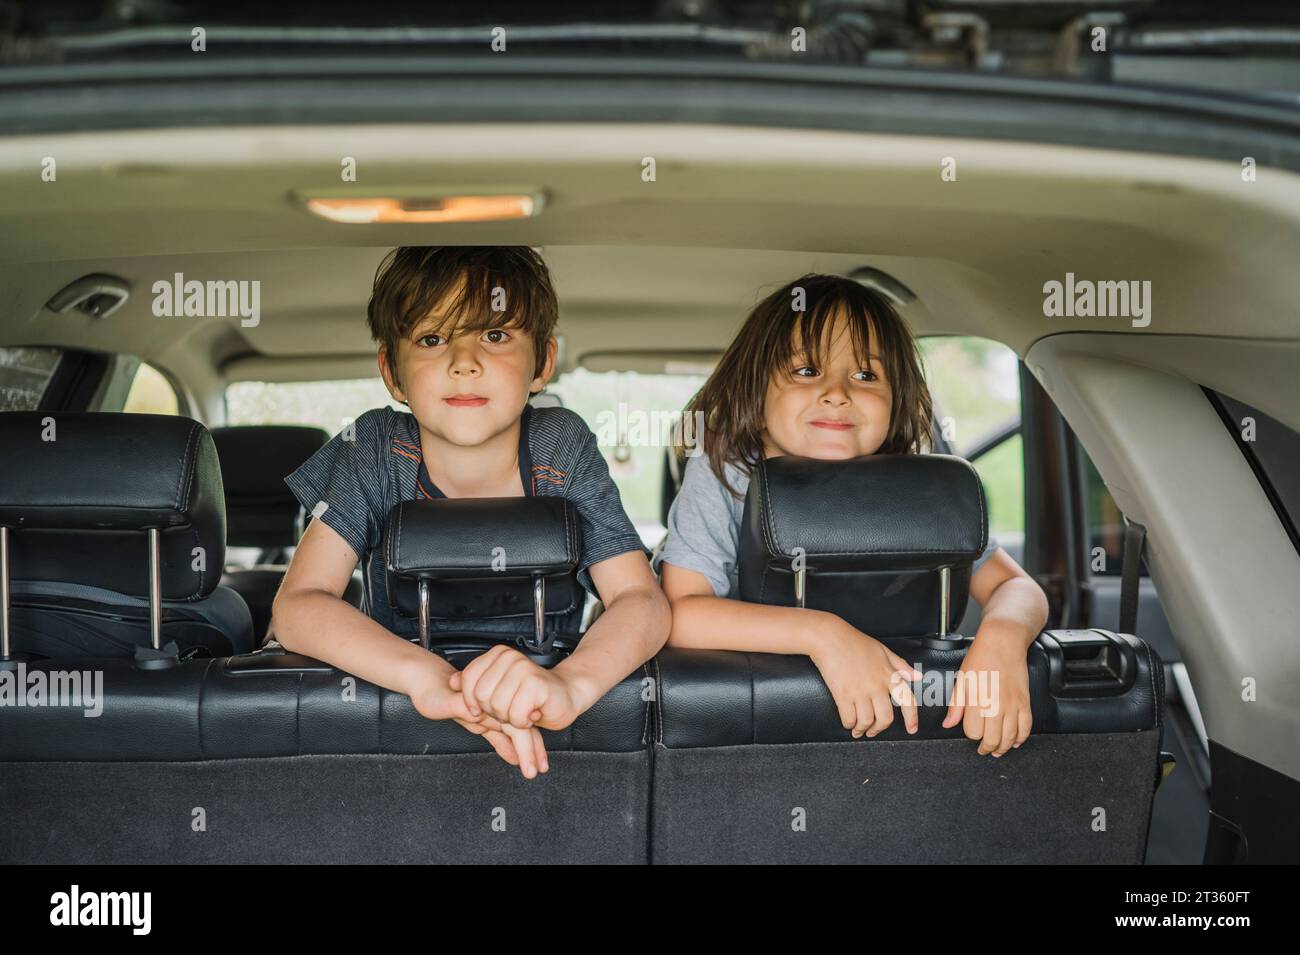 Smiling boys spending leisure time in car Stock Photo